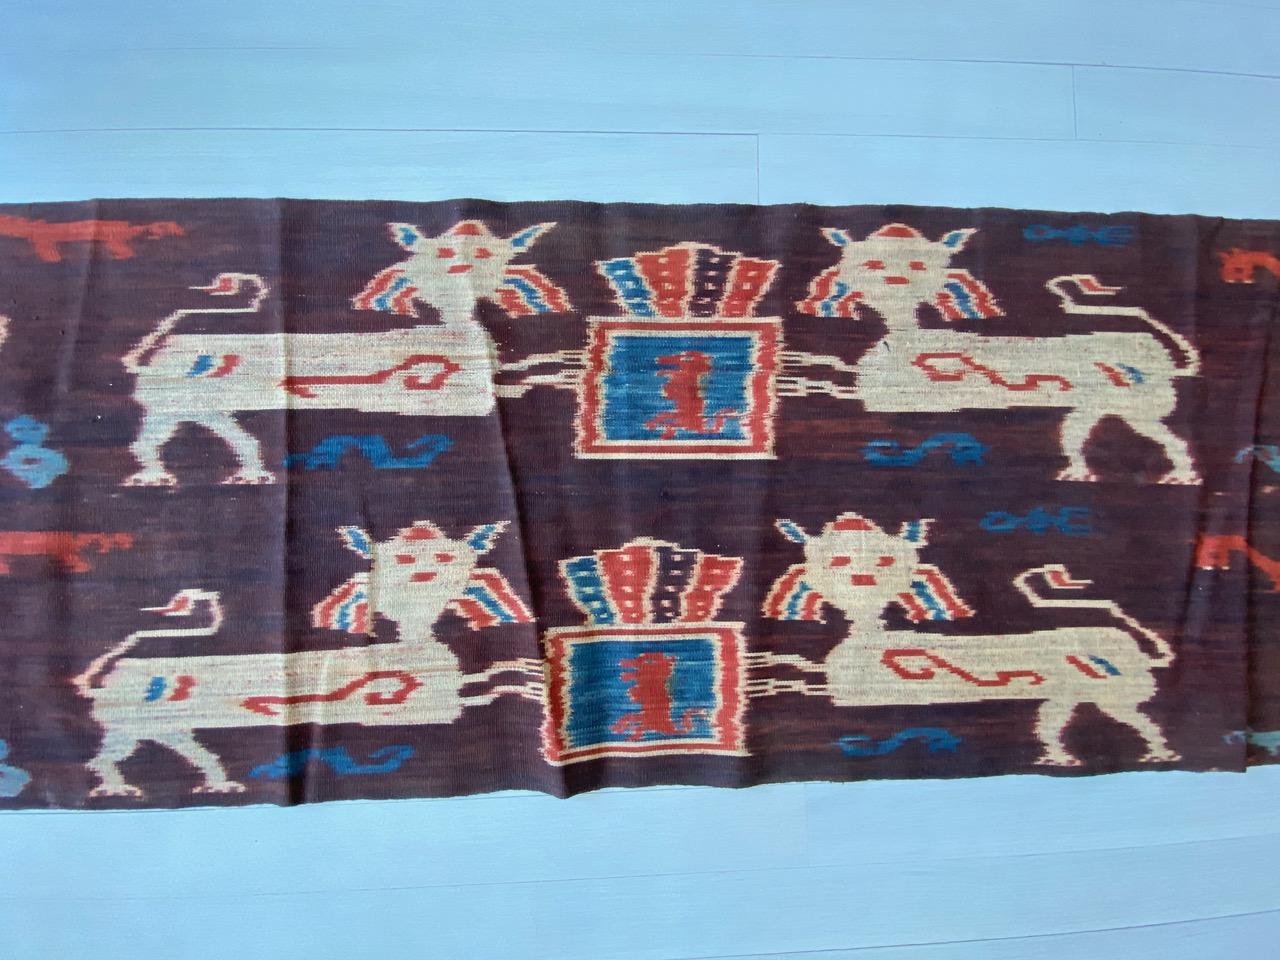 Incredibly long rare ikat from the island of Sumba. Ikat is an ancient technique which is used to add patterns to textiles. The designs are created in the yarns rather than on the finished cloth, resulting in both sides patterned with